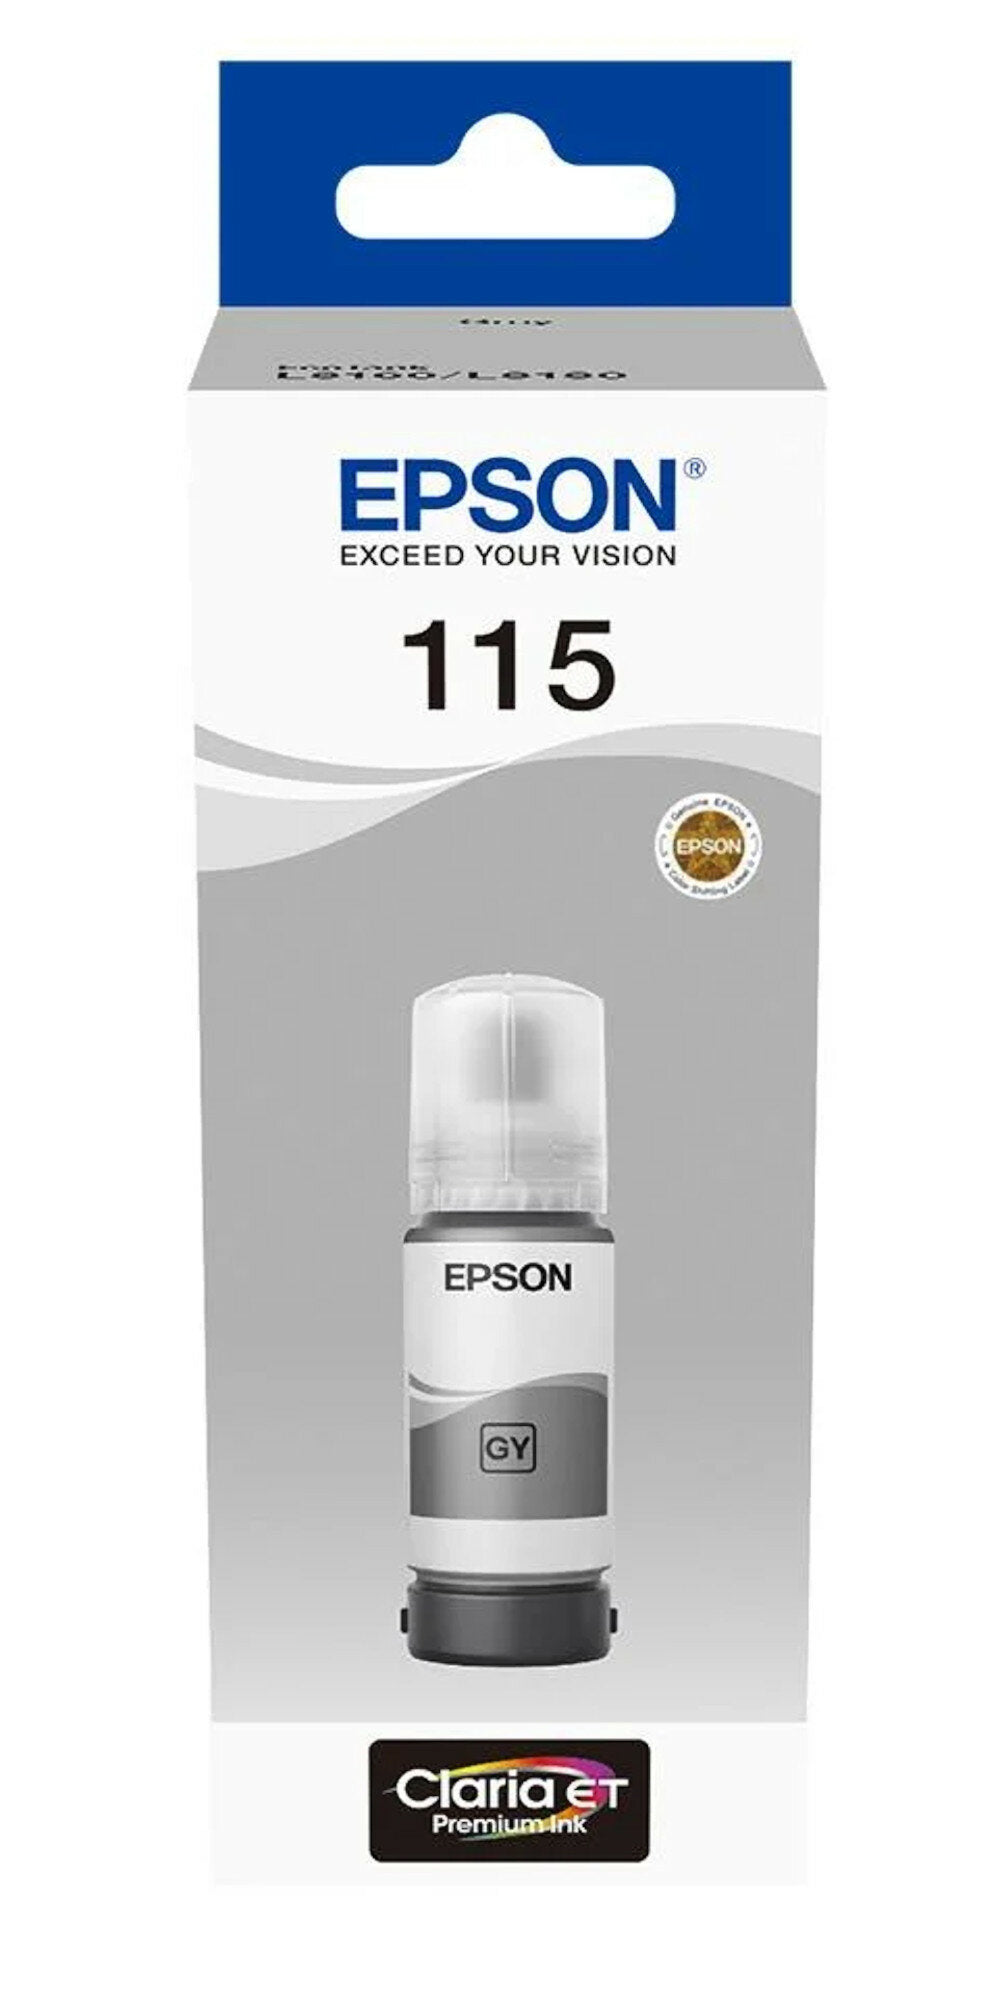 Epson 115 ink for Epson L8160, L8180 printers